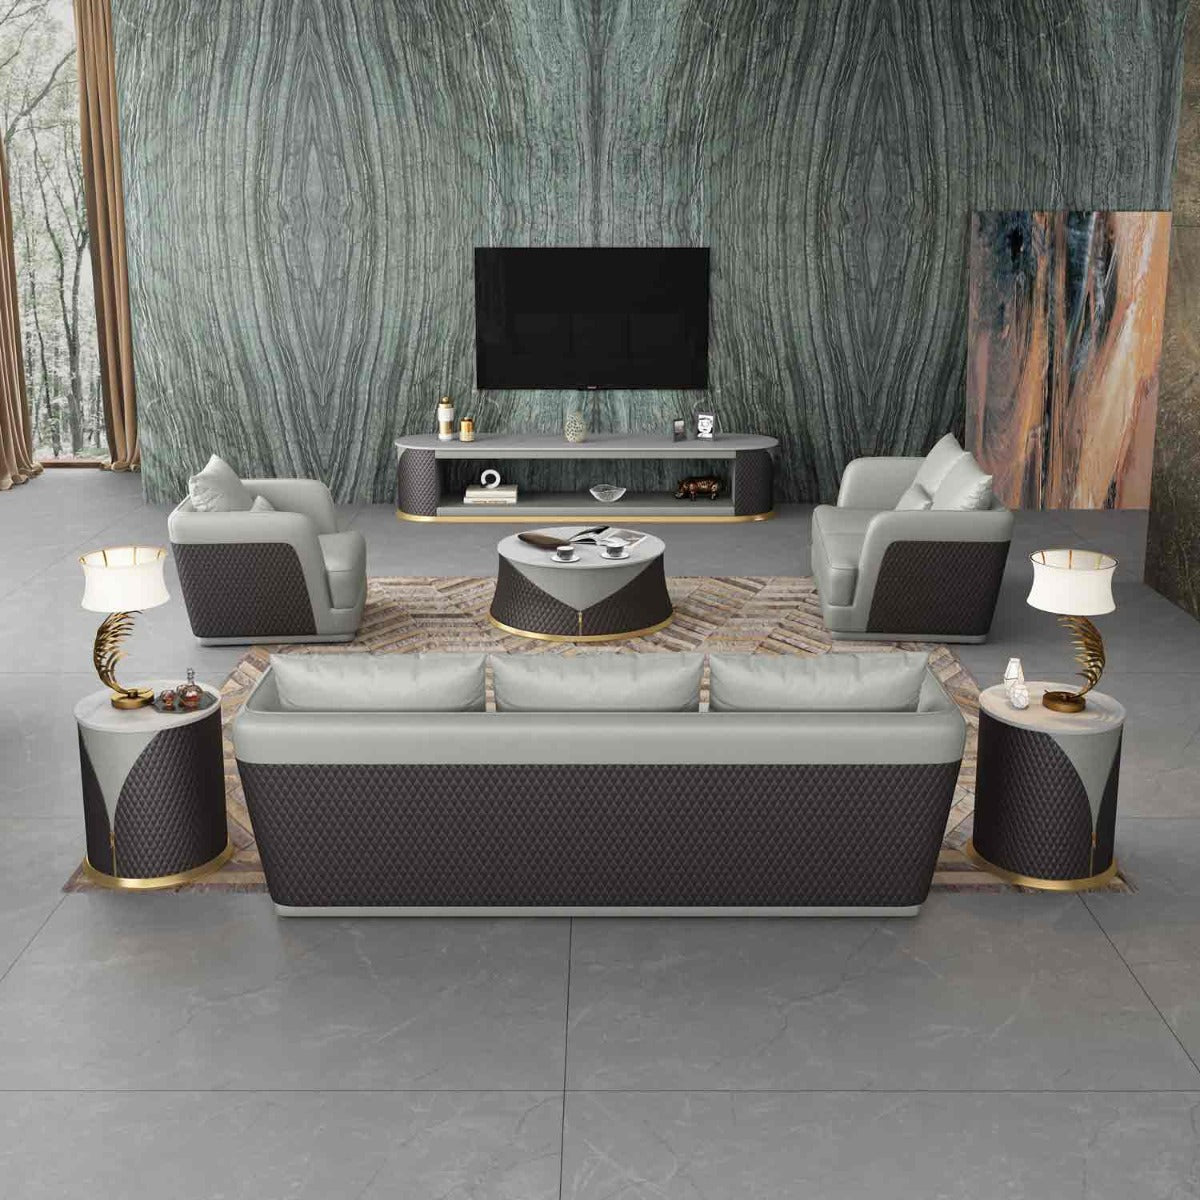 European Furniture - Glamour 3 Piece Living Room Set in Grey-Chocolate - 51618-3SET - New Star Living